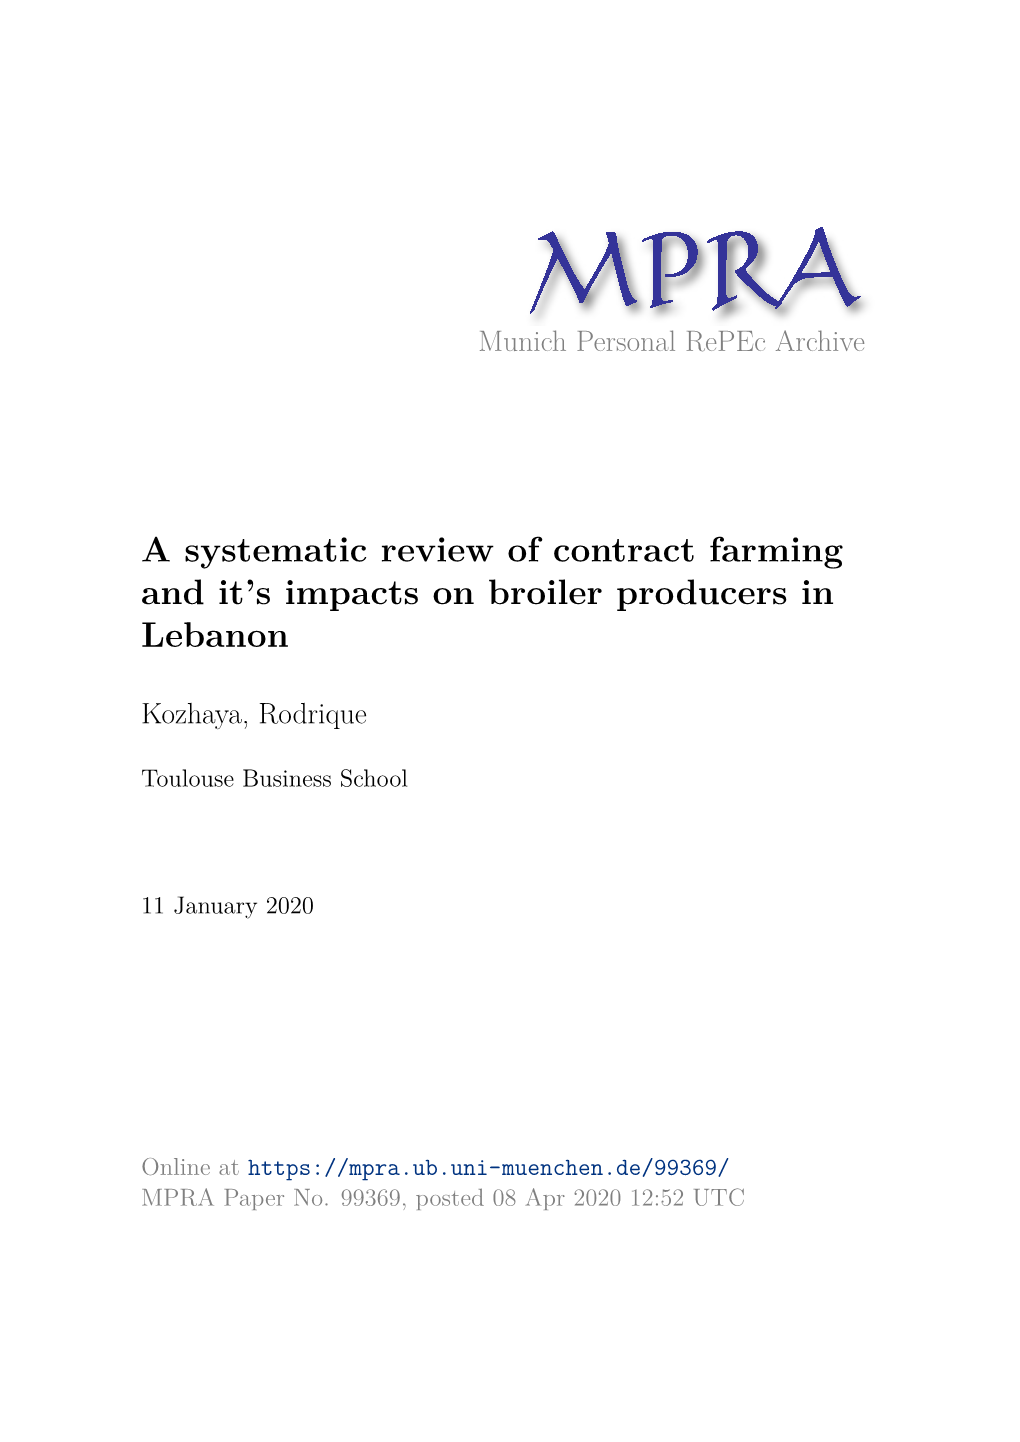 A Systematic Review of Contract Farming and It's Impacts on Broiler